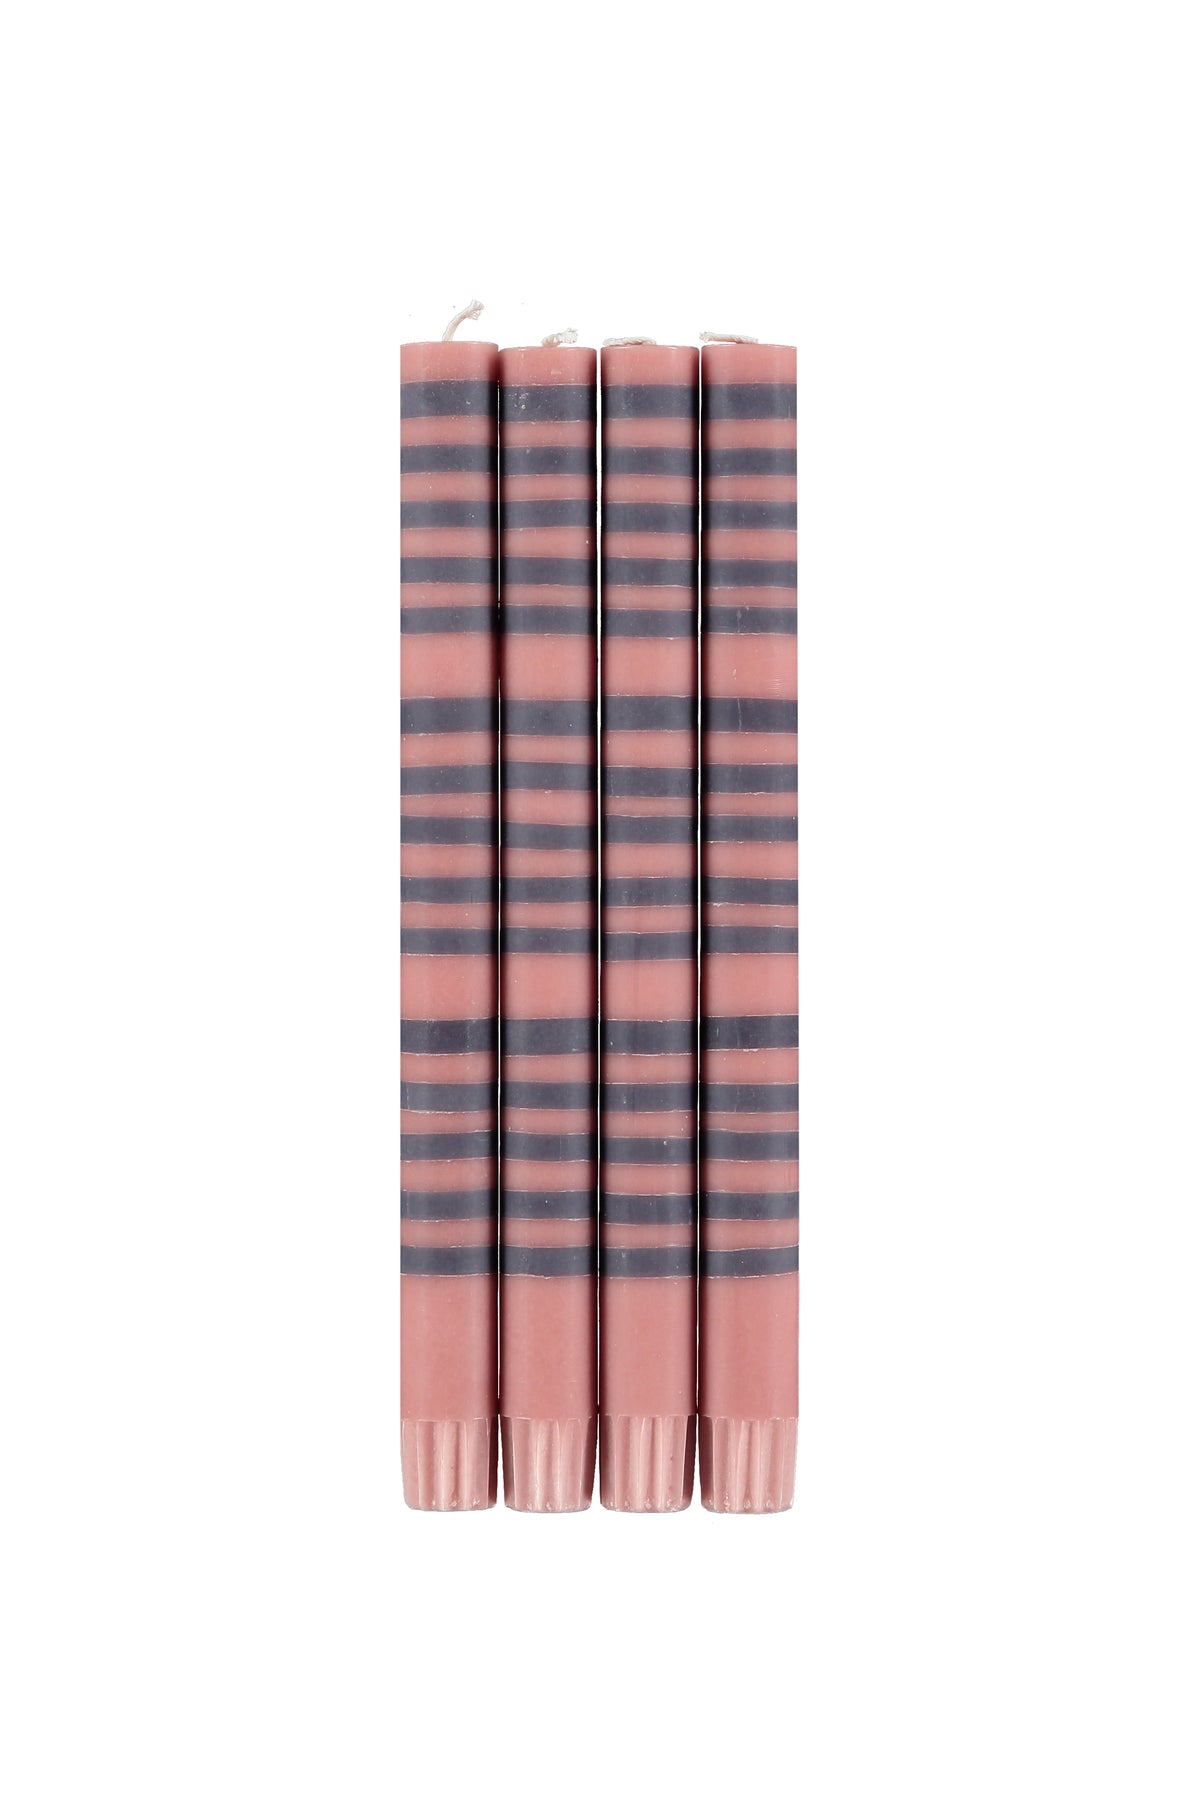 Striped Candle [Old Rose & Gunmetal] | Undisclosed